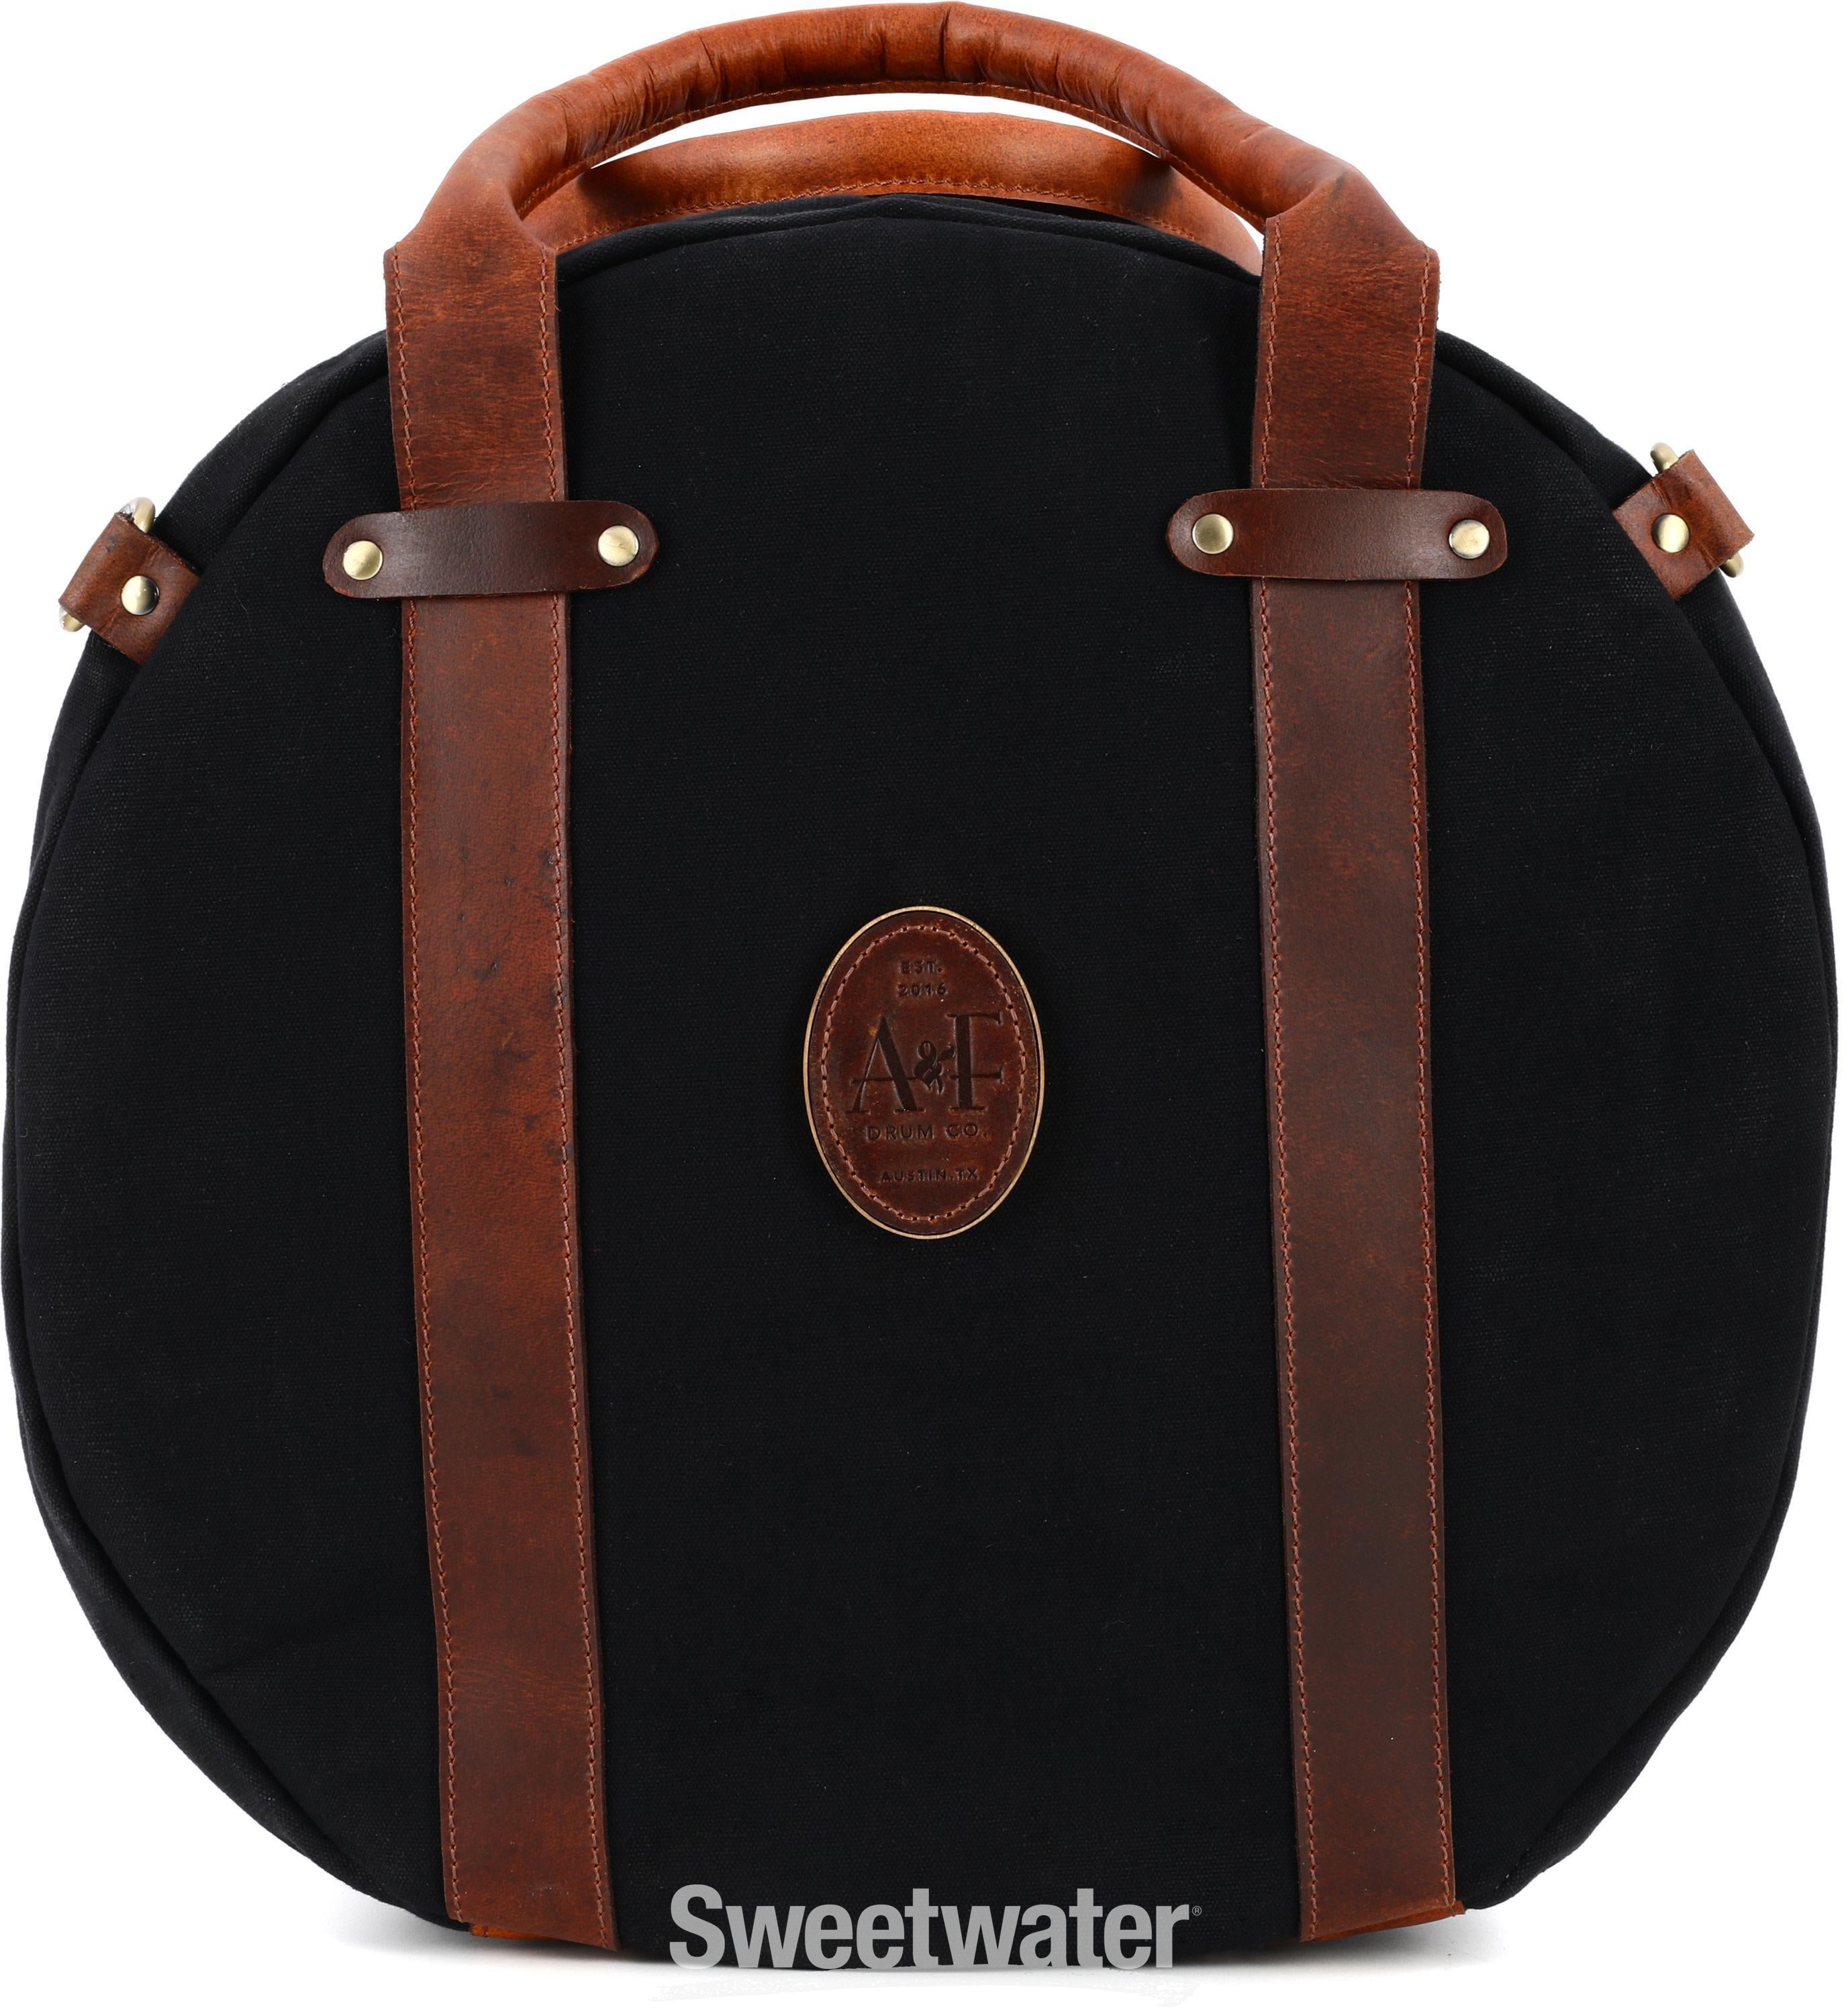 A&F Drum Company Canvas & Leather Snare Drum Bag